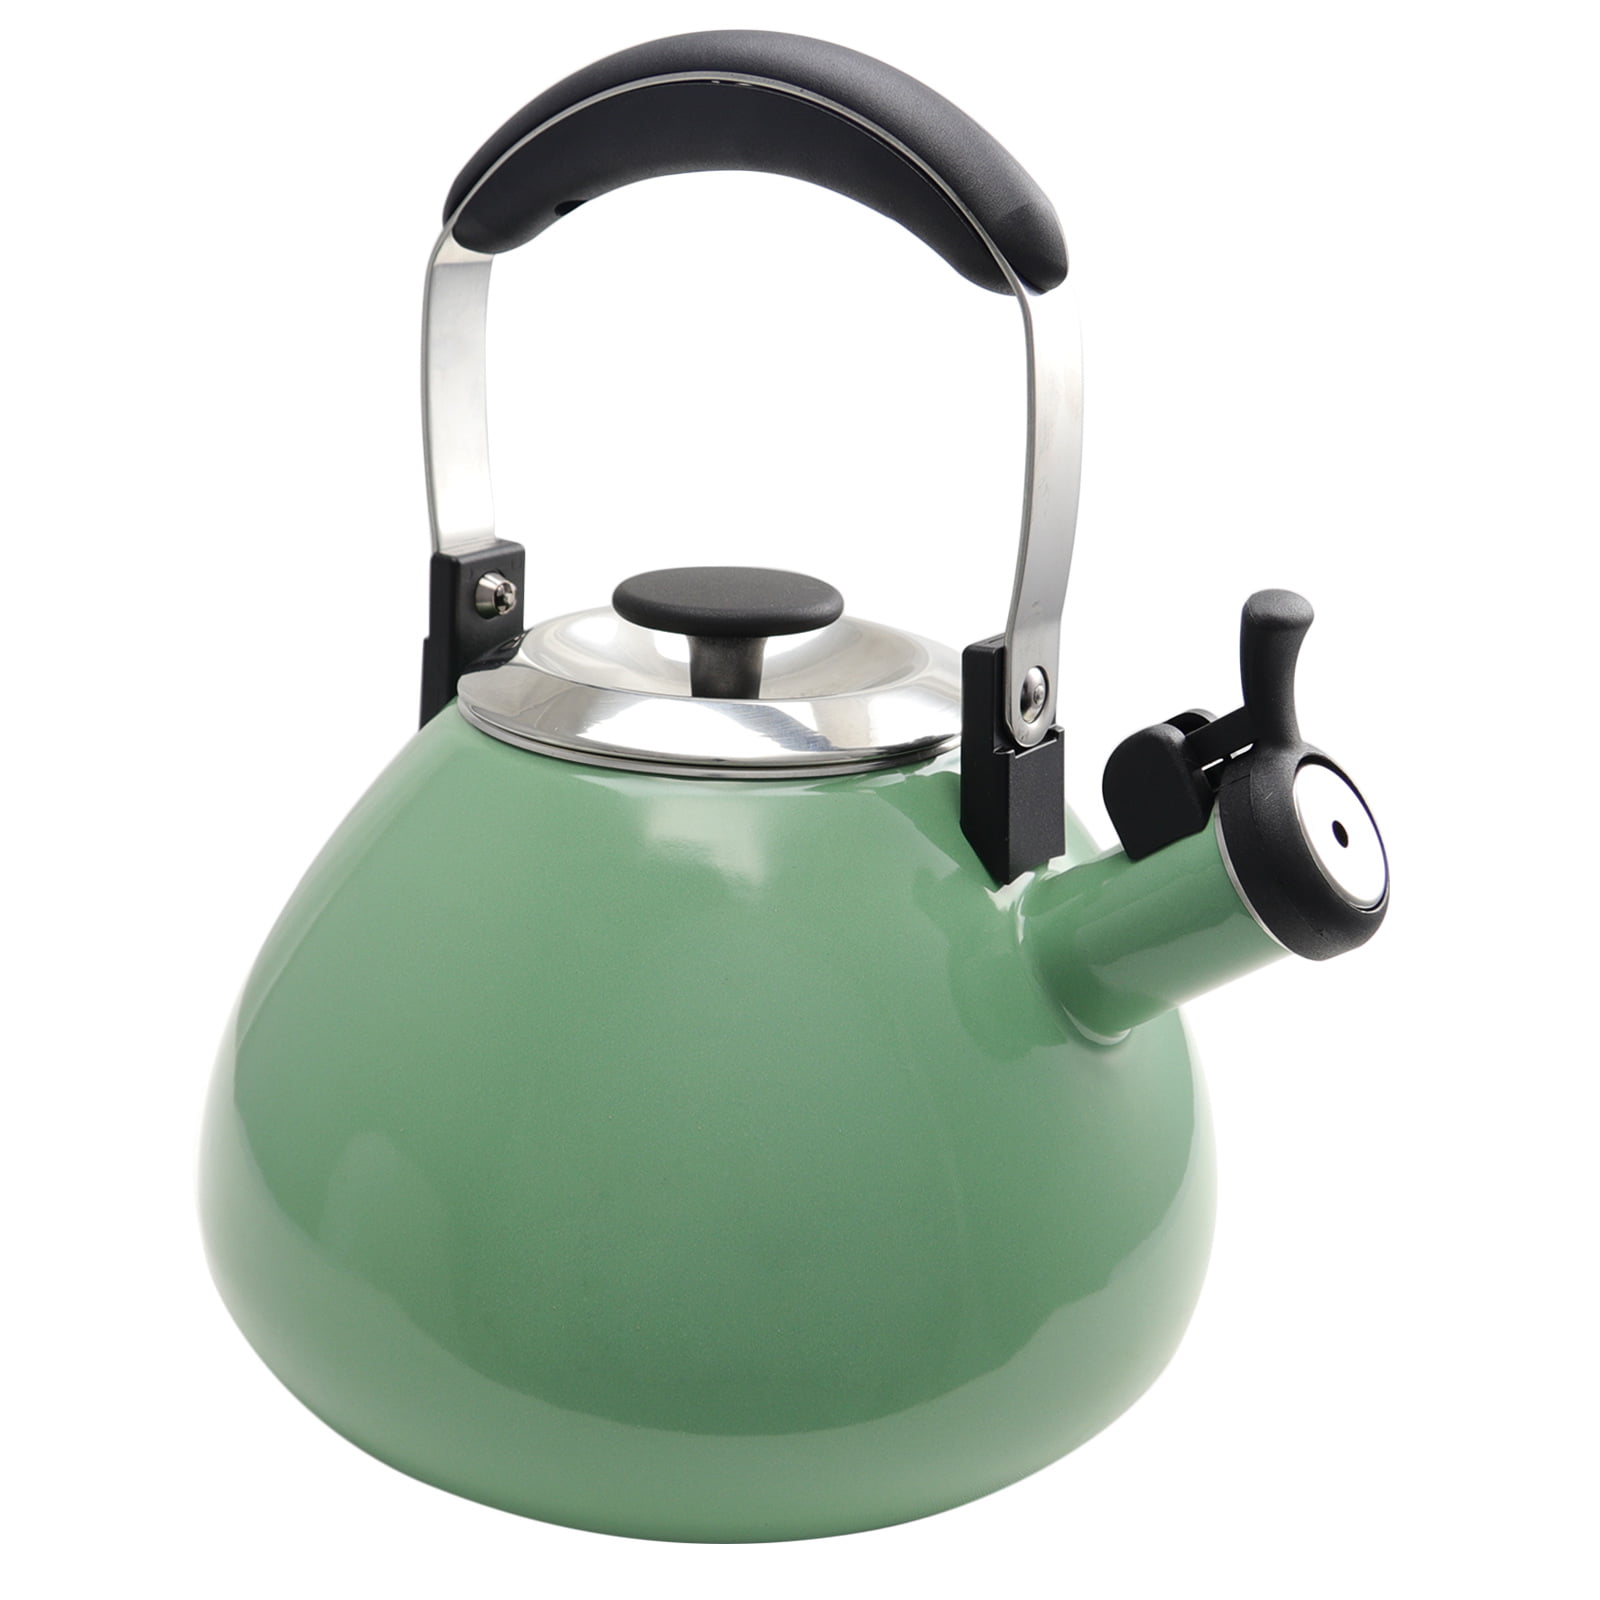 BARVIVO Whistling Tea Kettle - 3 Quart Large Size - Perfect Tea Pots for  Stove Top for Preparing Hot Water for Coffee or Tea - Stainless Steel Tea